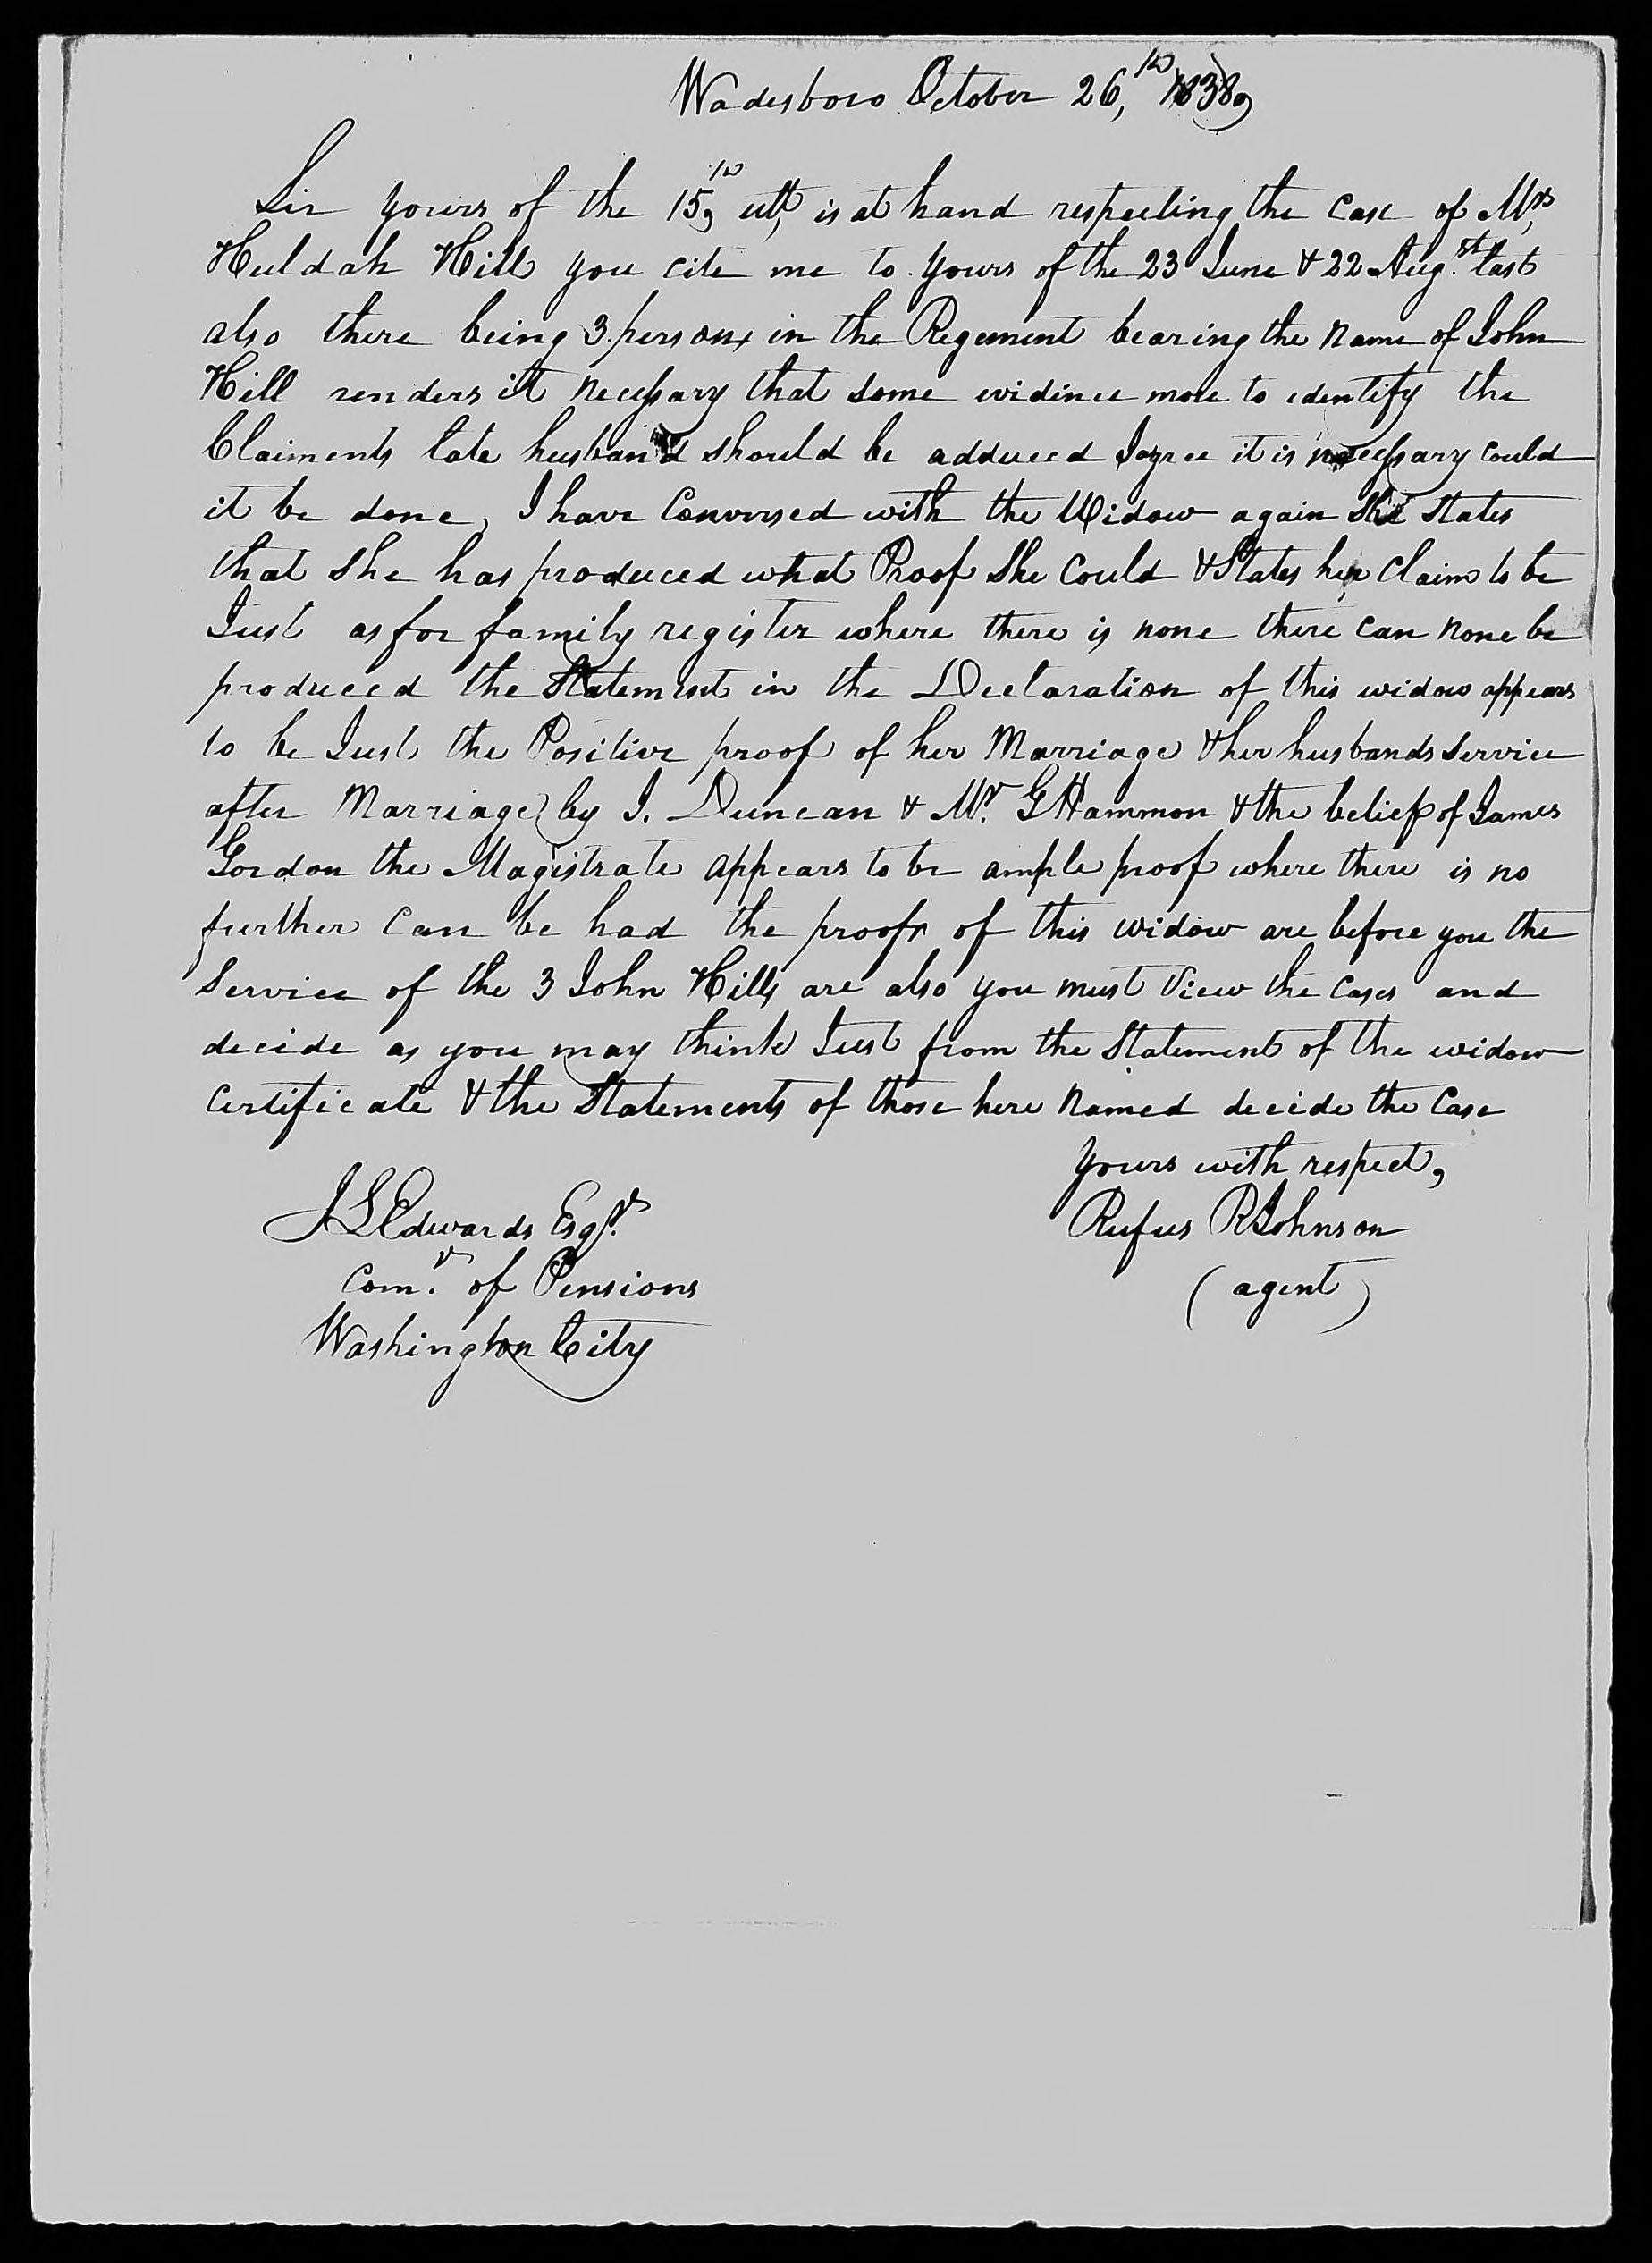 Letter from Rufus R. Johnson to James L. Edwards, 26 October 1838